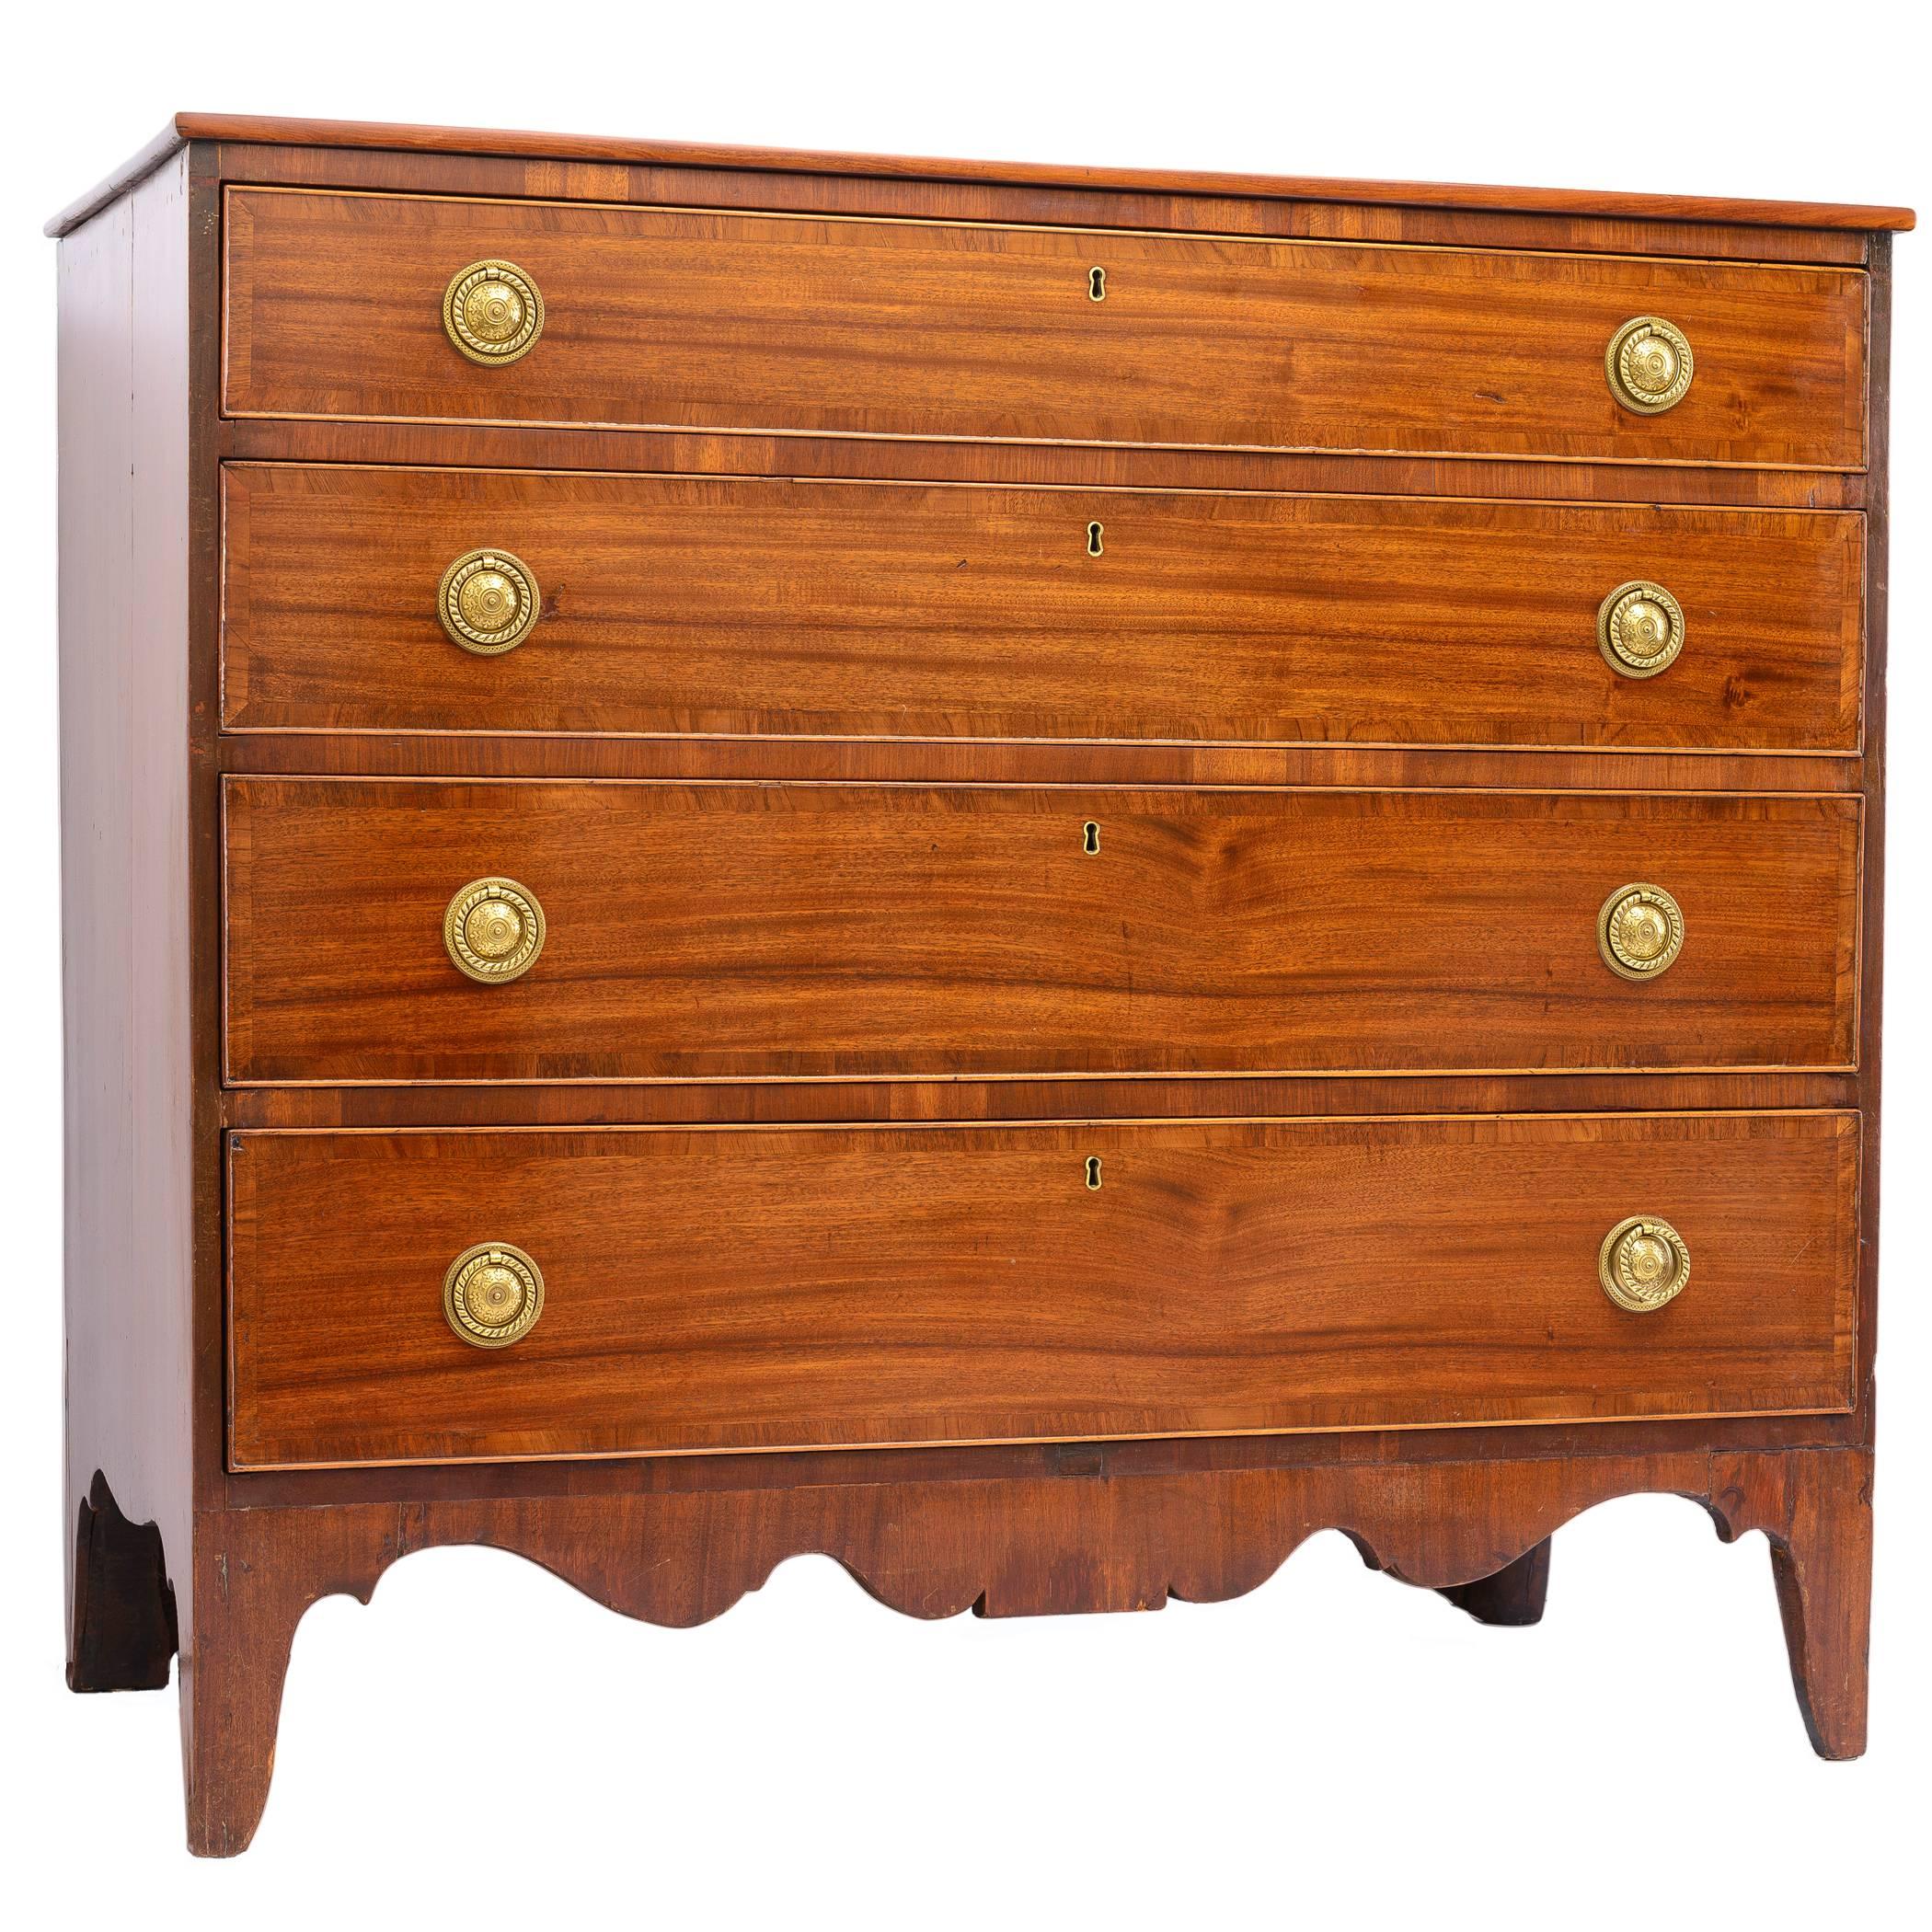 American 18th Century Federal Mahogany Chest of Drawers